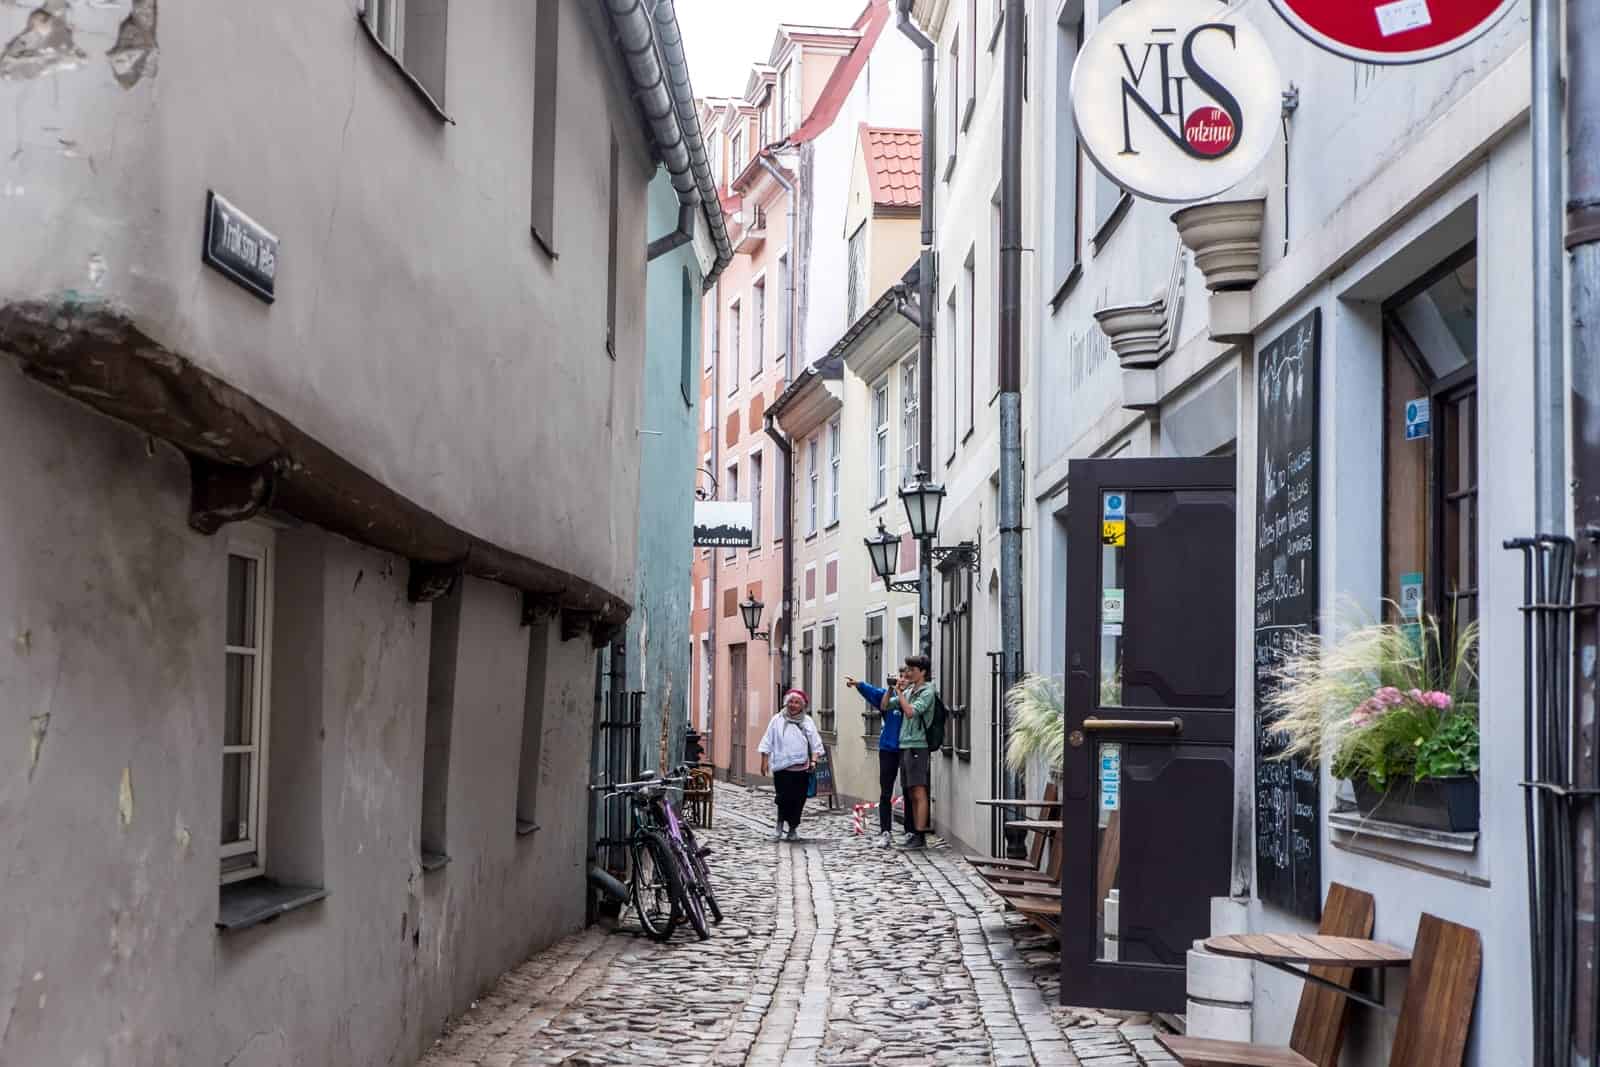 Narrow medieval street in Riga Old Town lined with shops